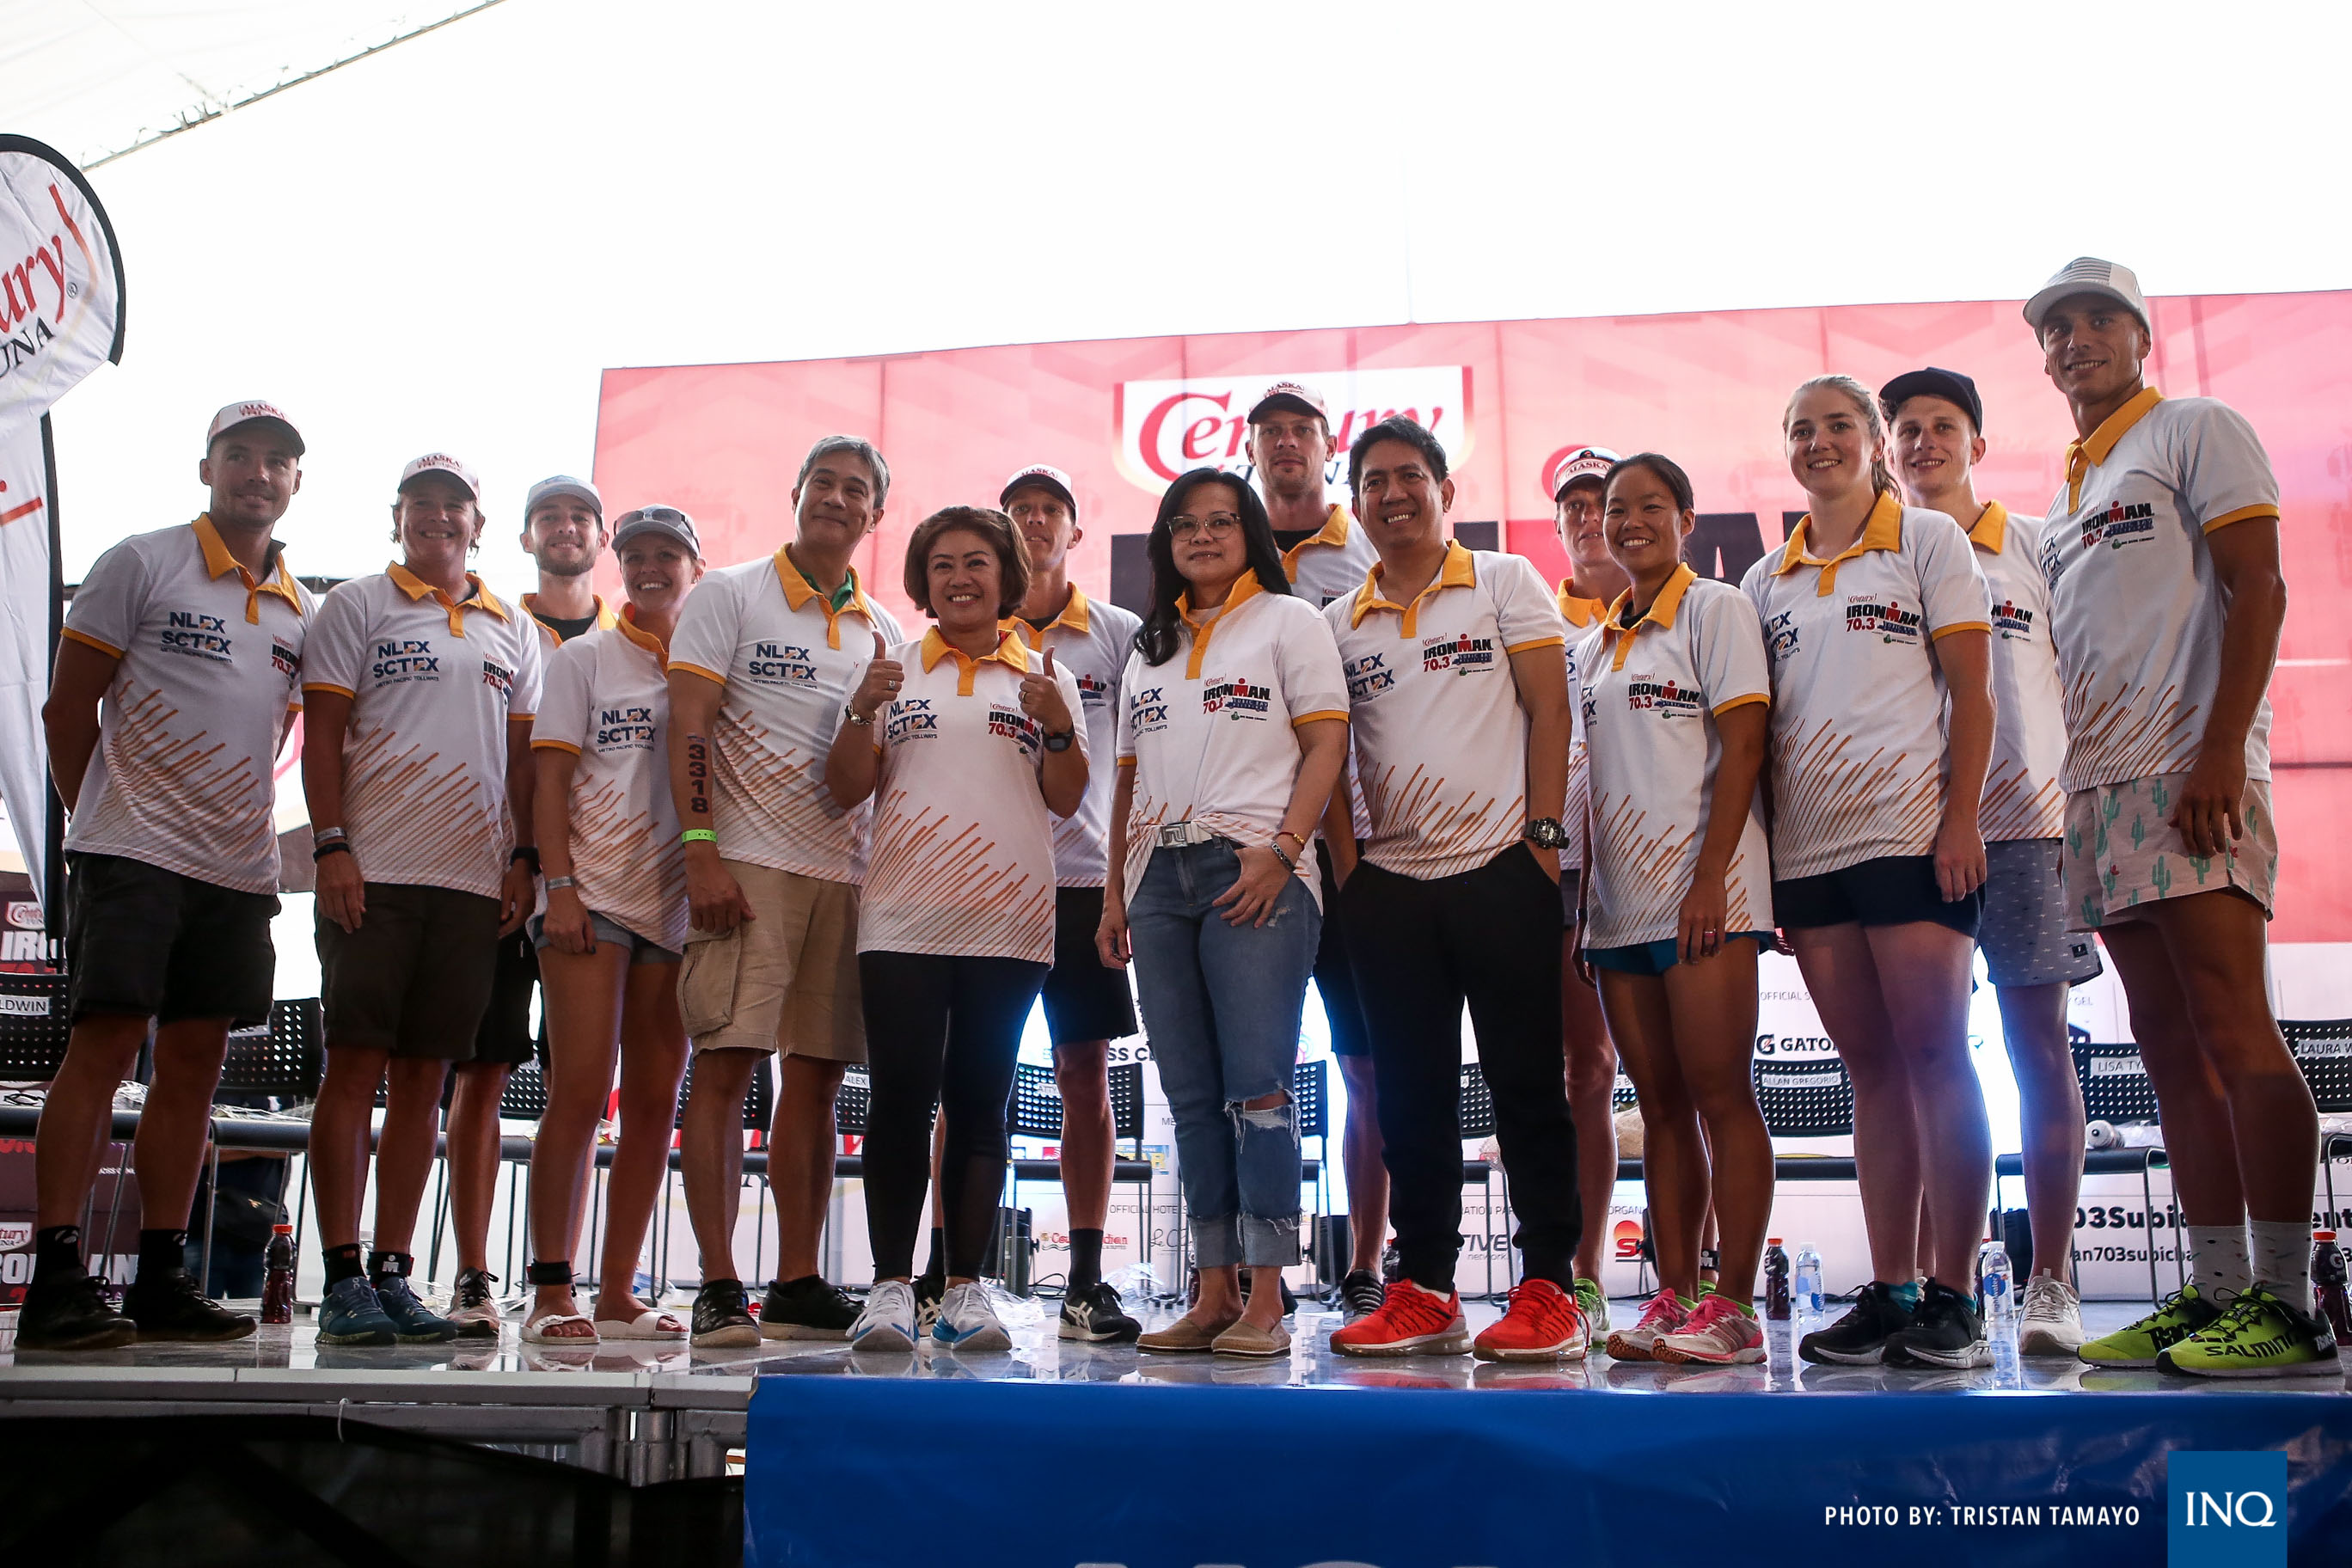 Philippines to host full Ironman again in 2020